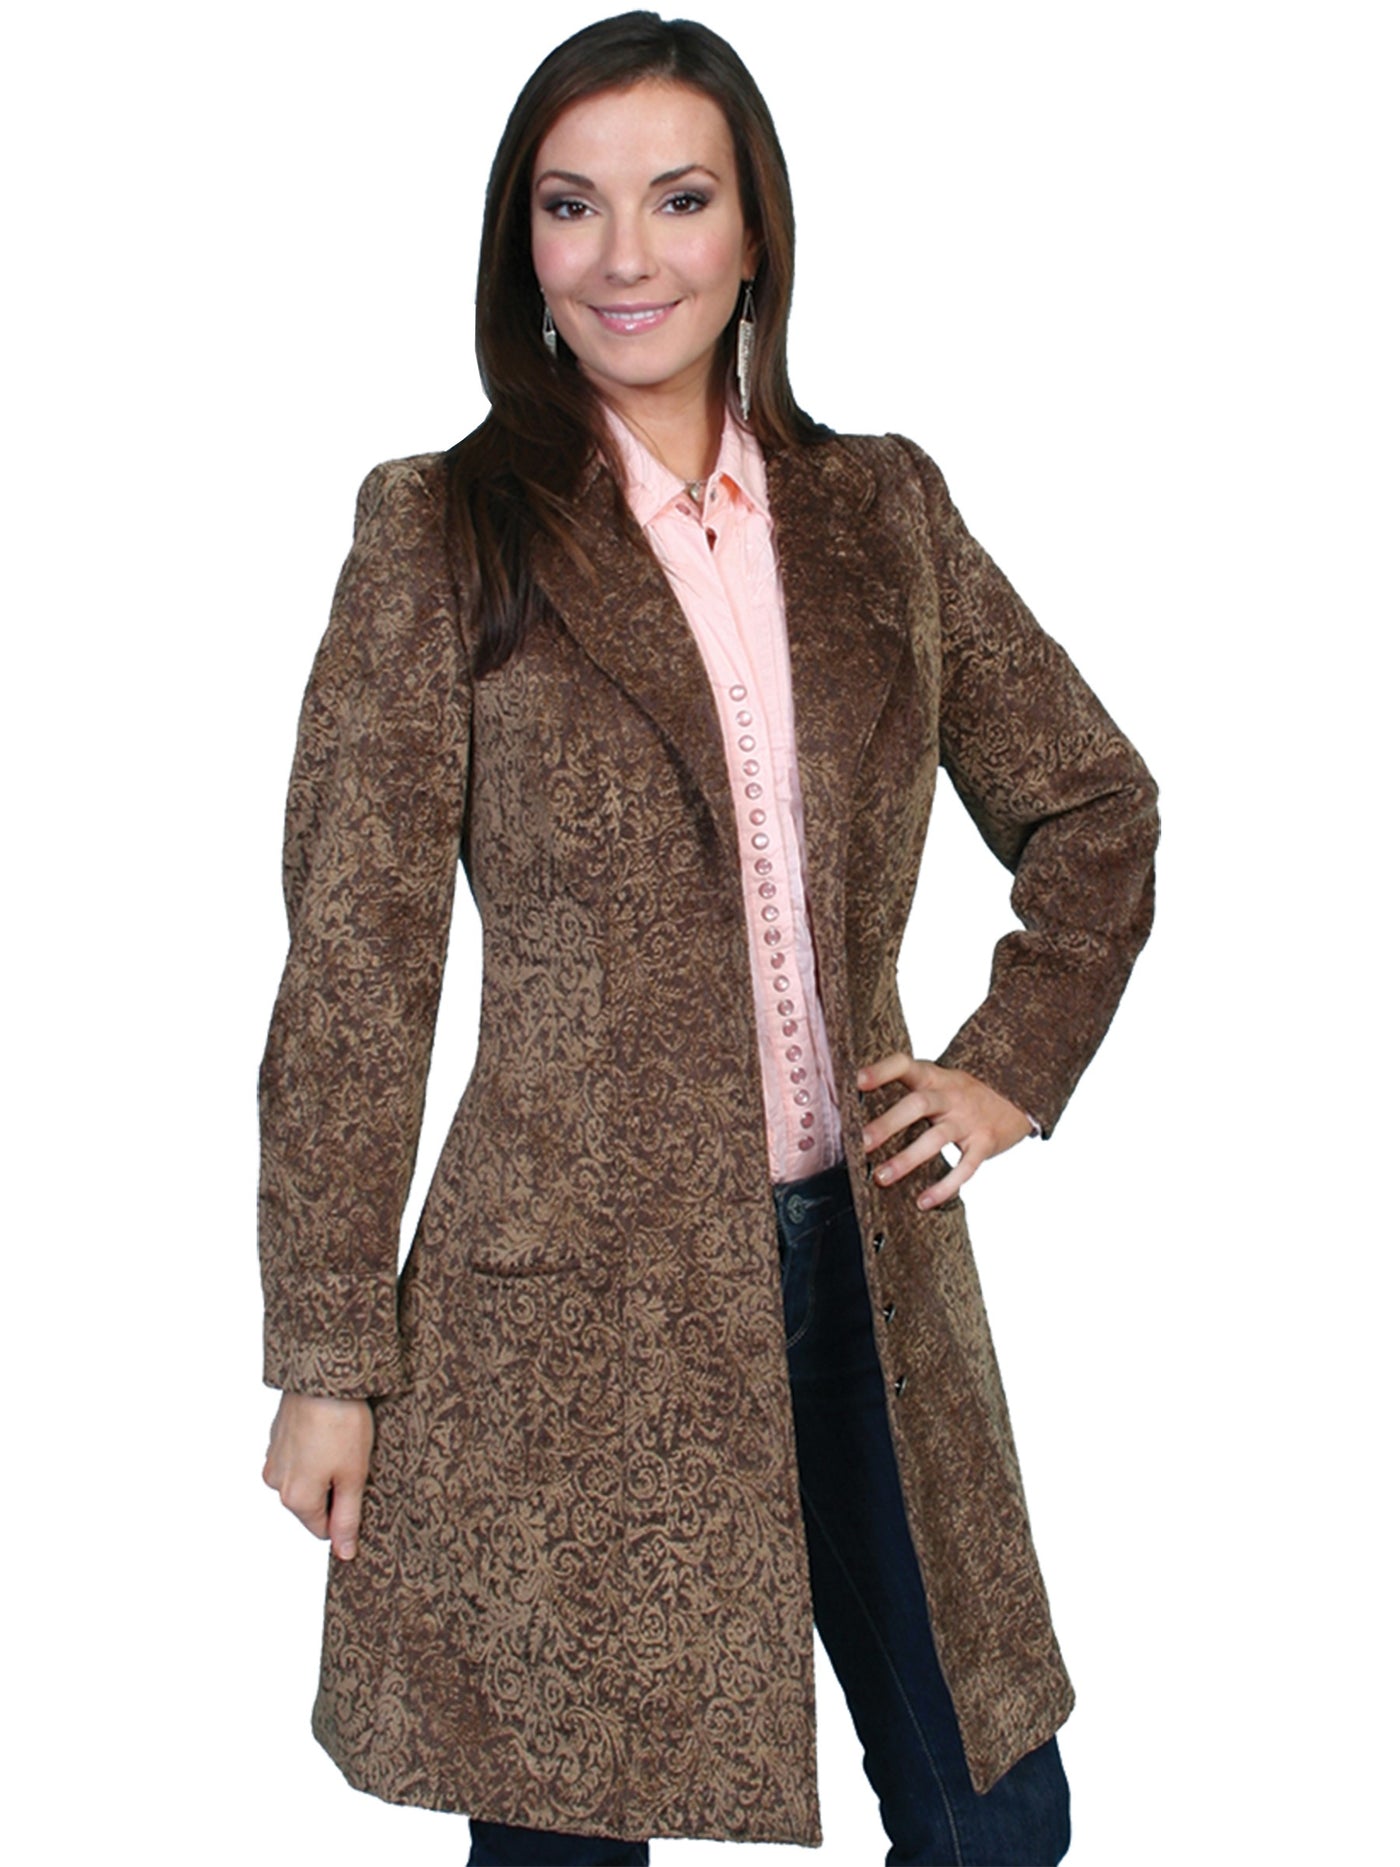 Western Style Chenille Frock Coat in Cafe - SOLD OUT